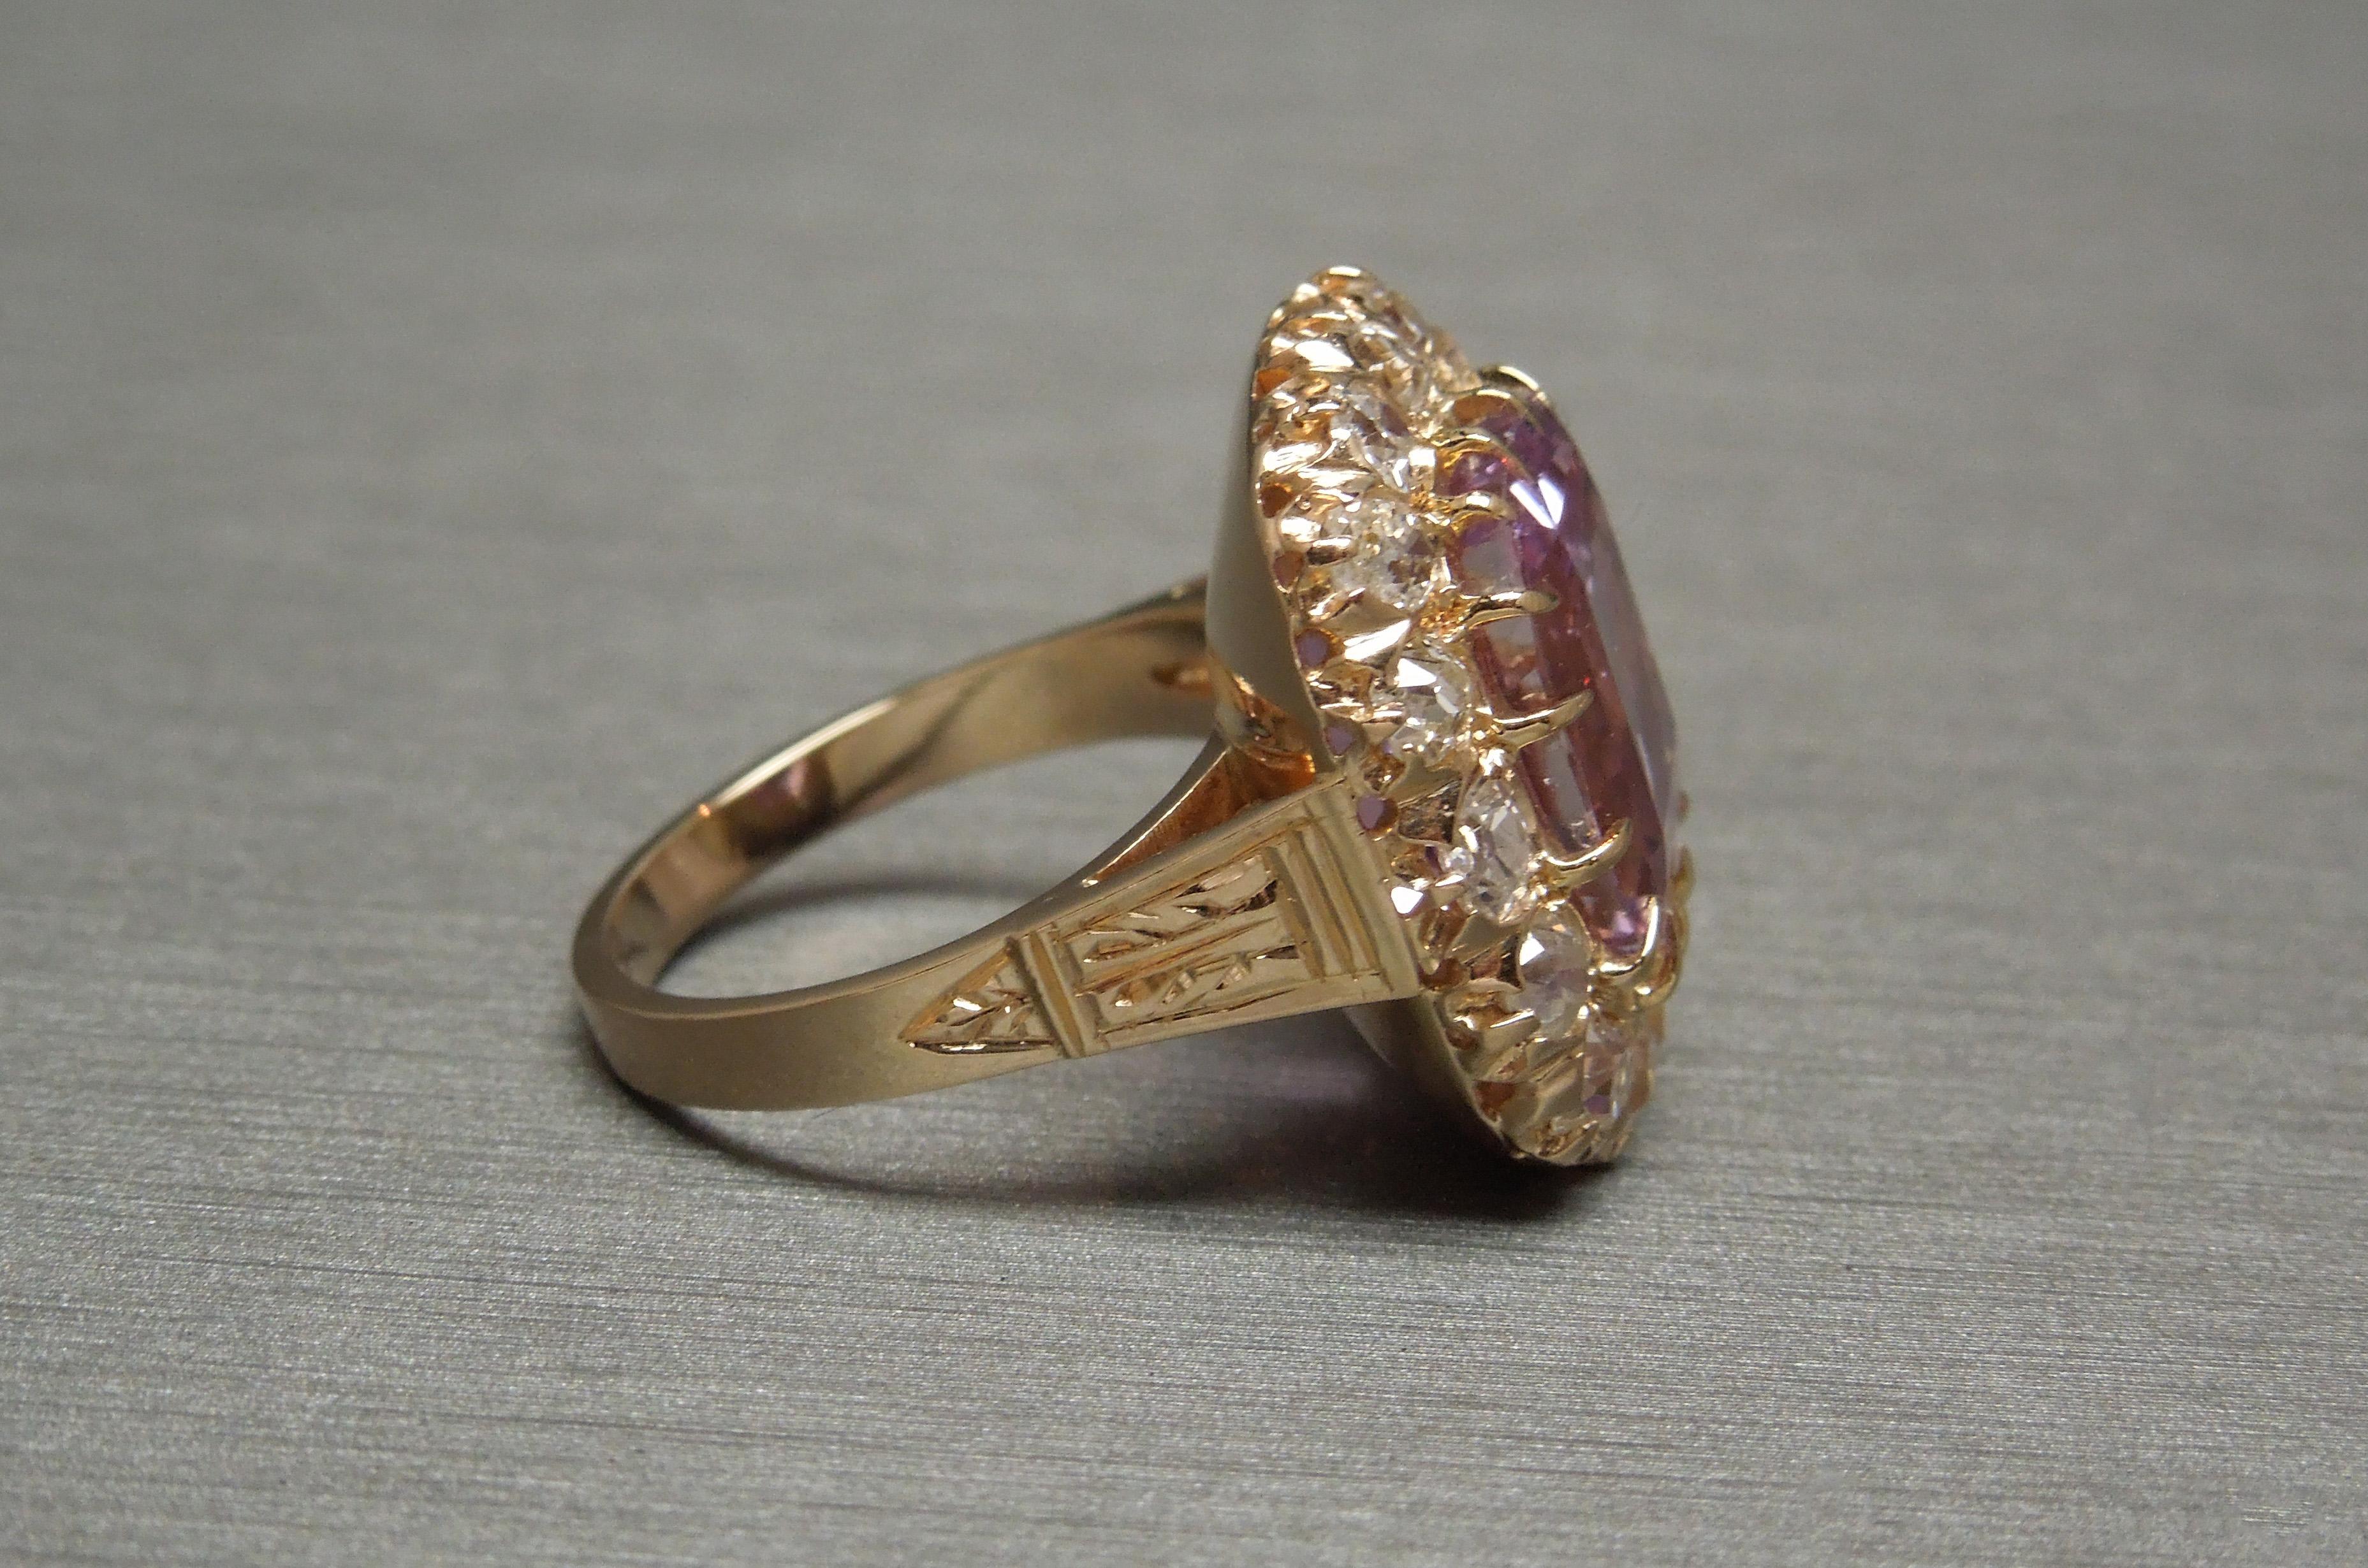 Cushion Cut Victorian GIA 10.10 Carat Pink Sapphire and Diamond Ring For Sale